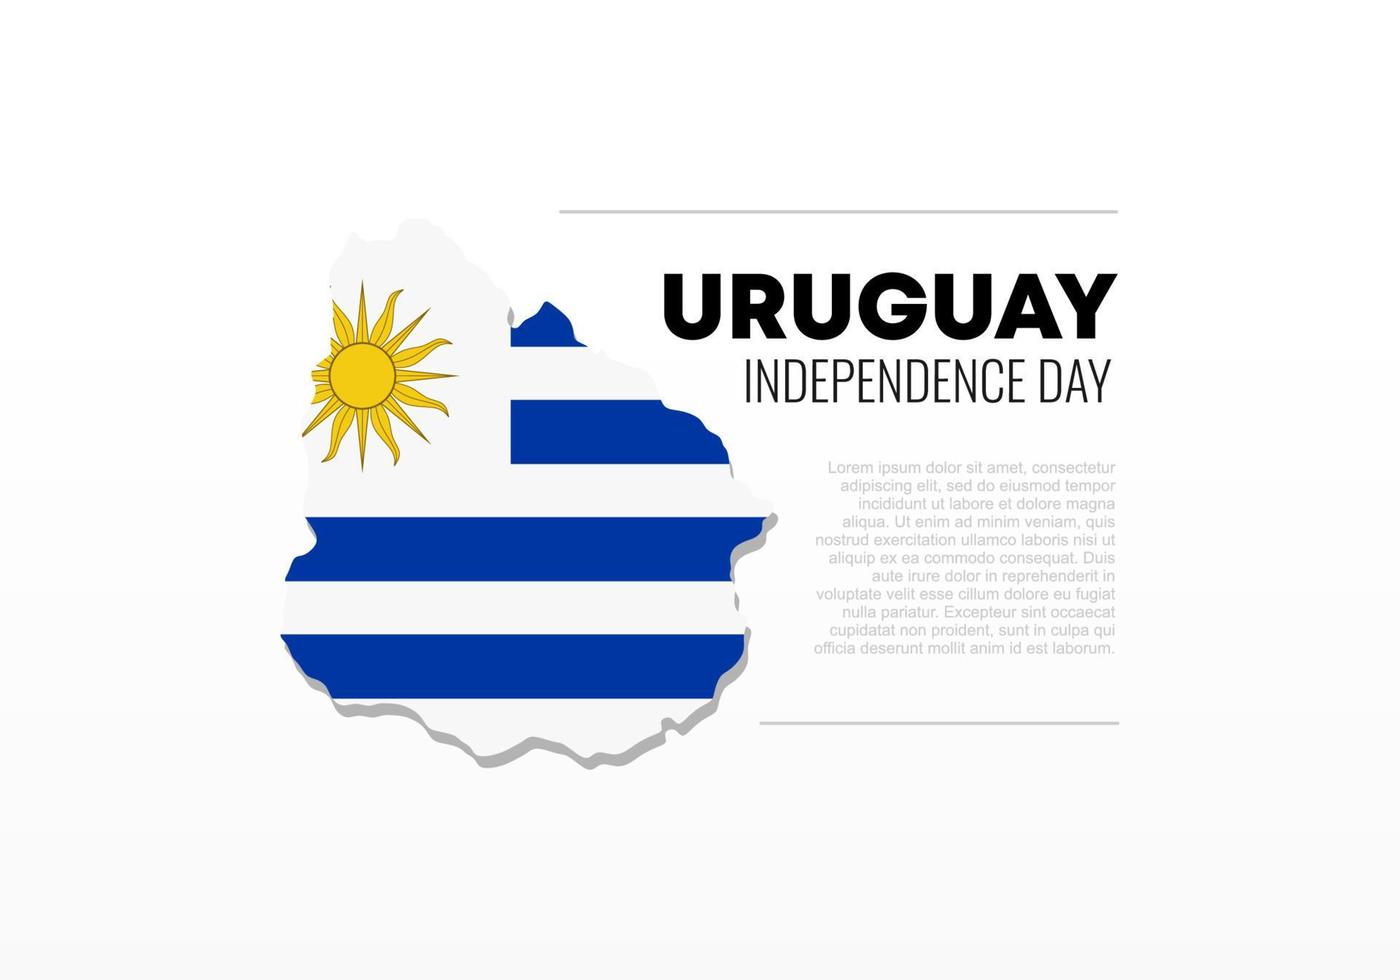 Uruguay independence day background for celebration on august 25. vector